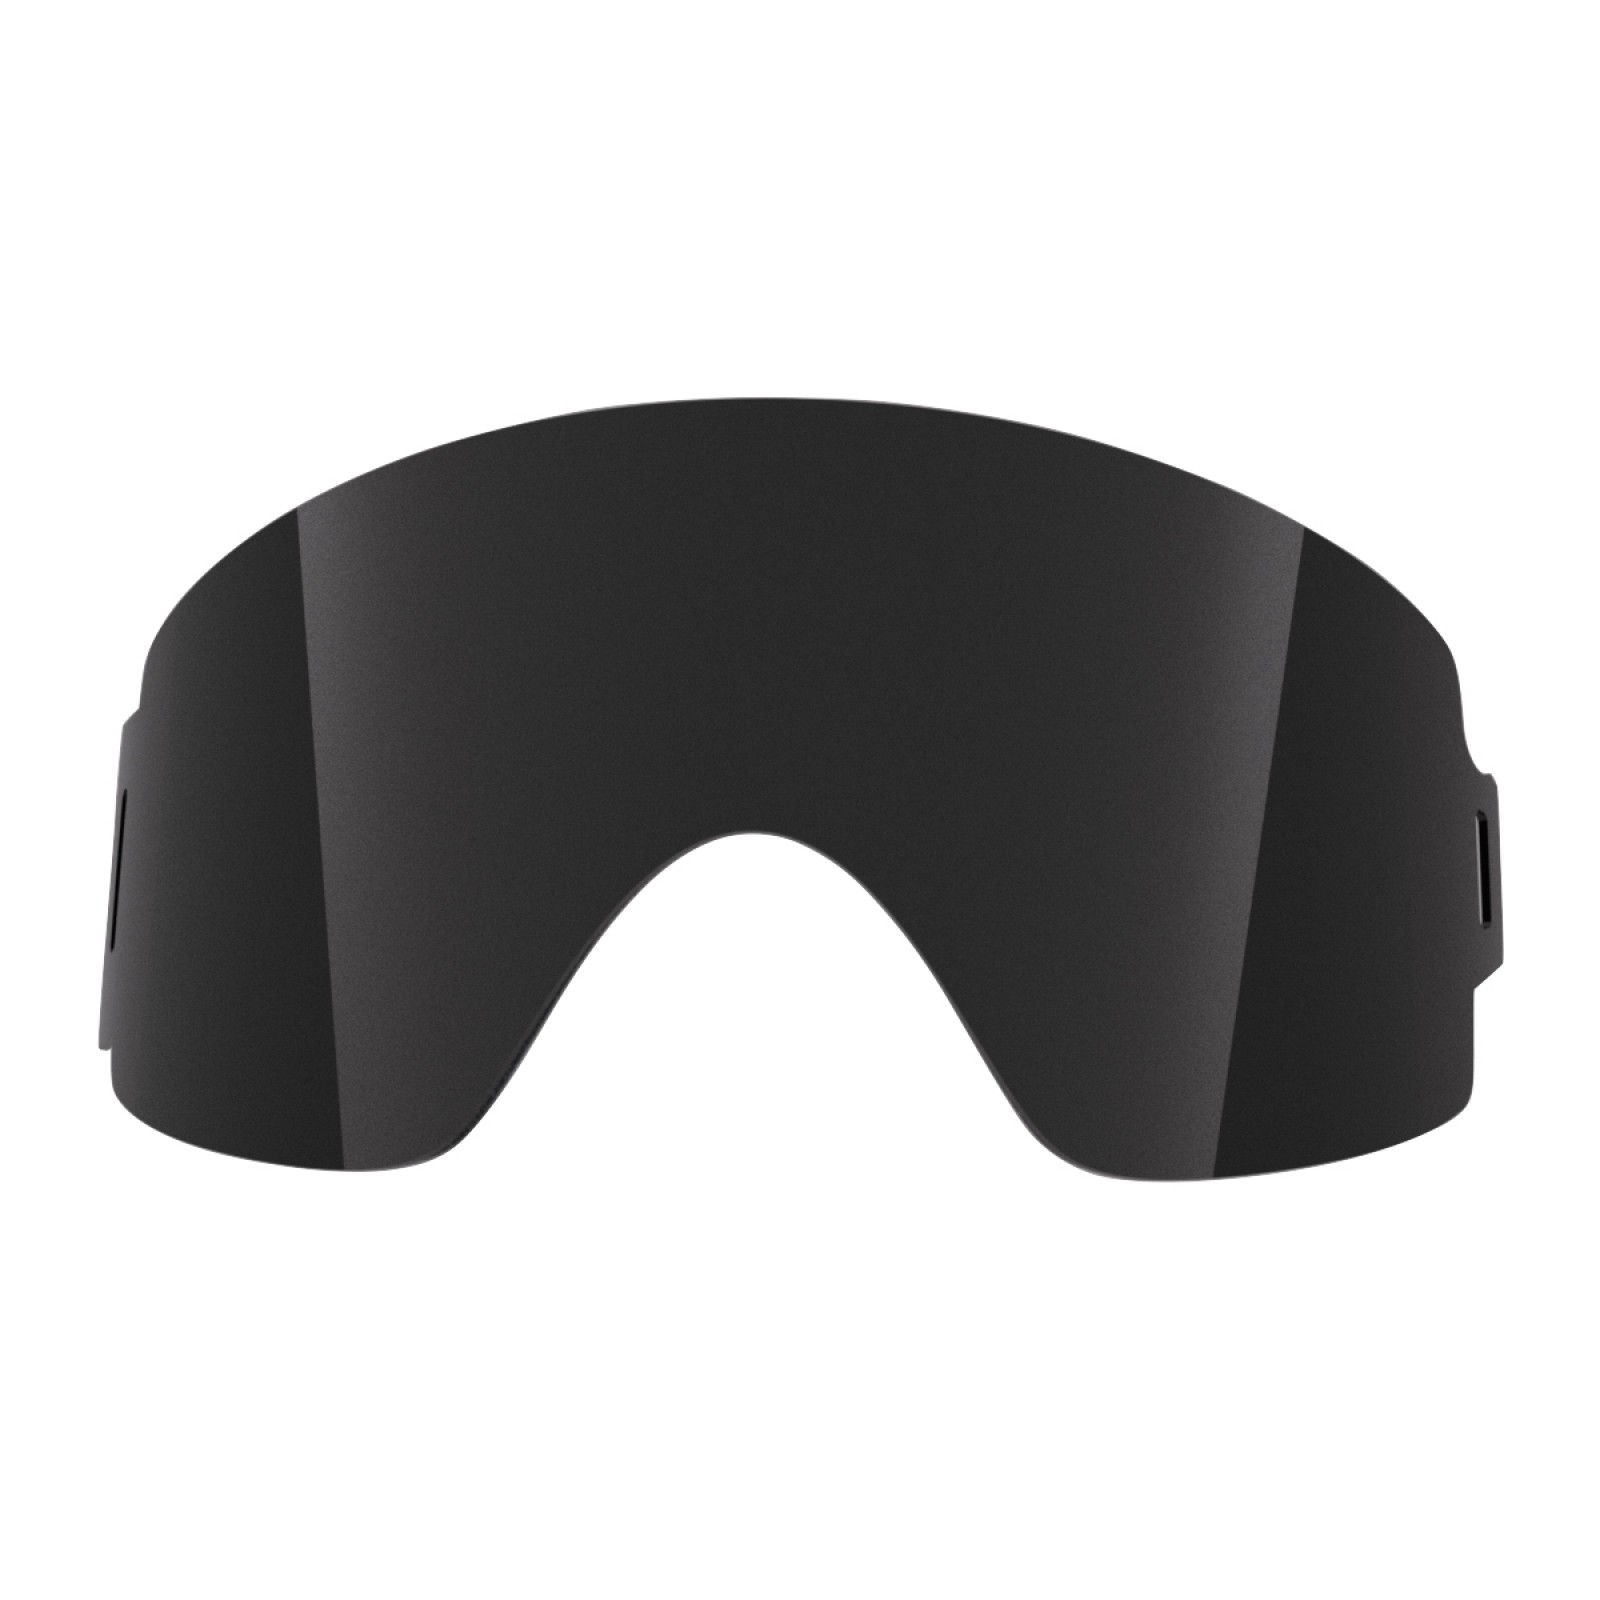 The One Nero lens for Shift goggle